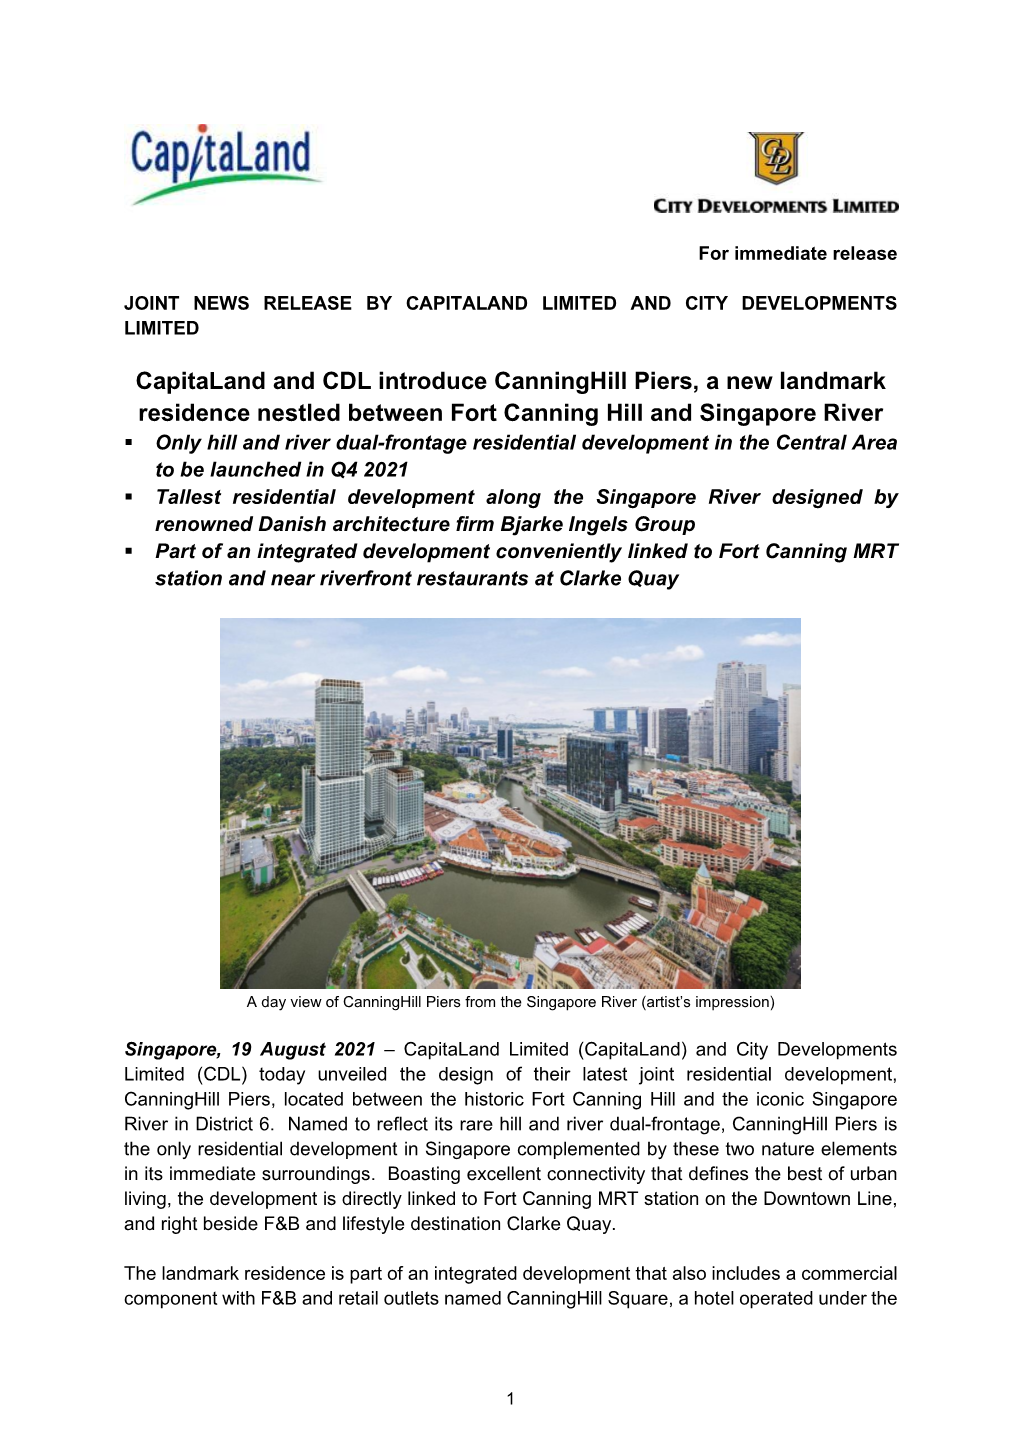 Capitaland and CDL Introduce Canninghill Piers, a New Landmark